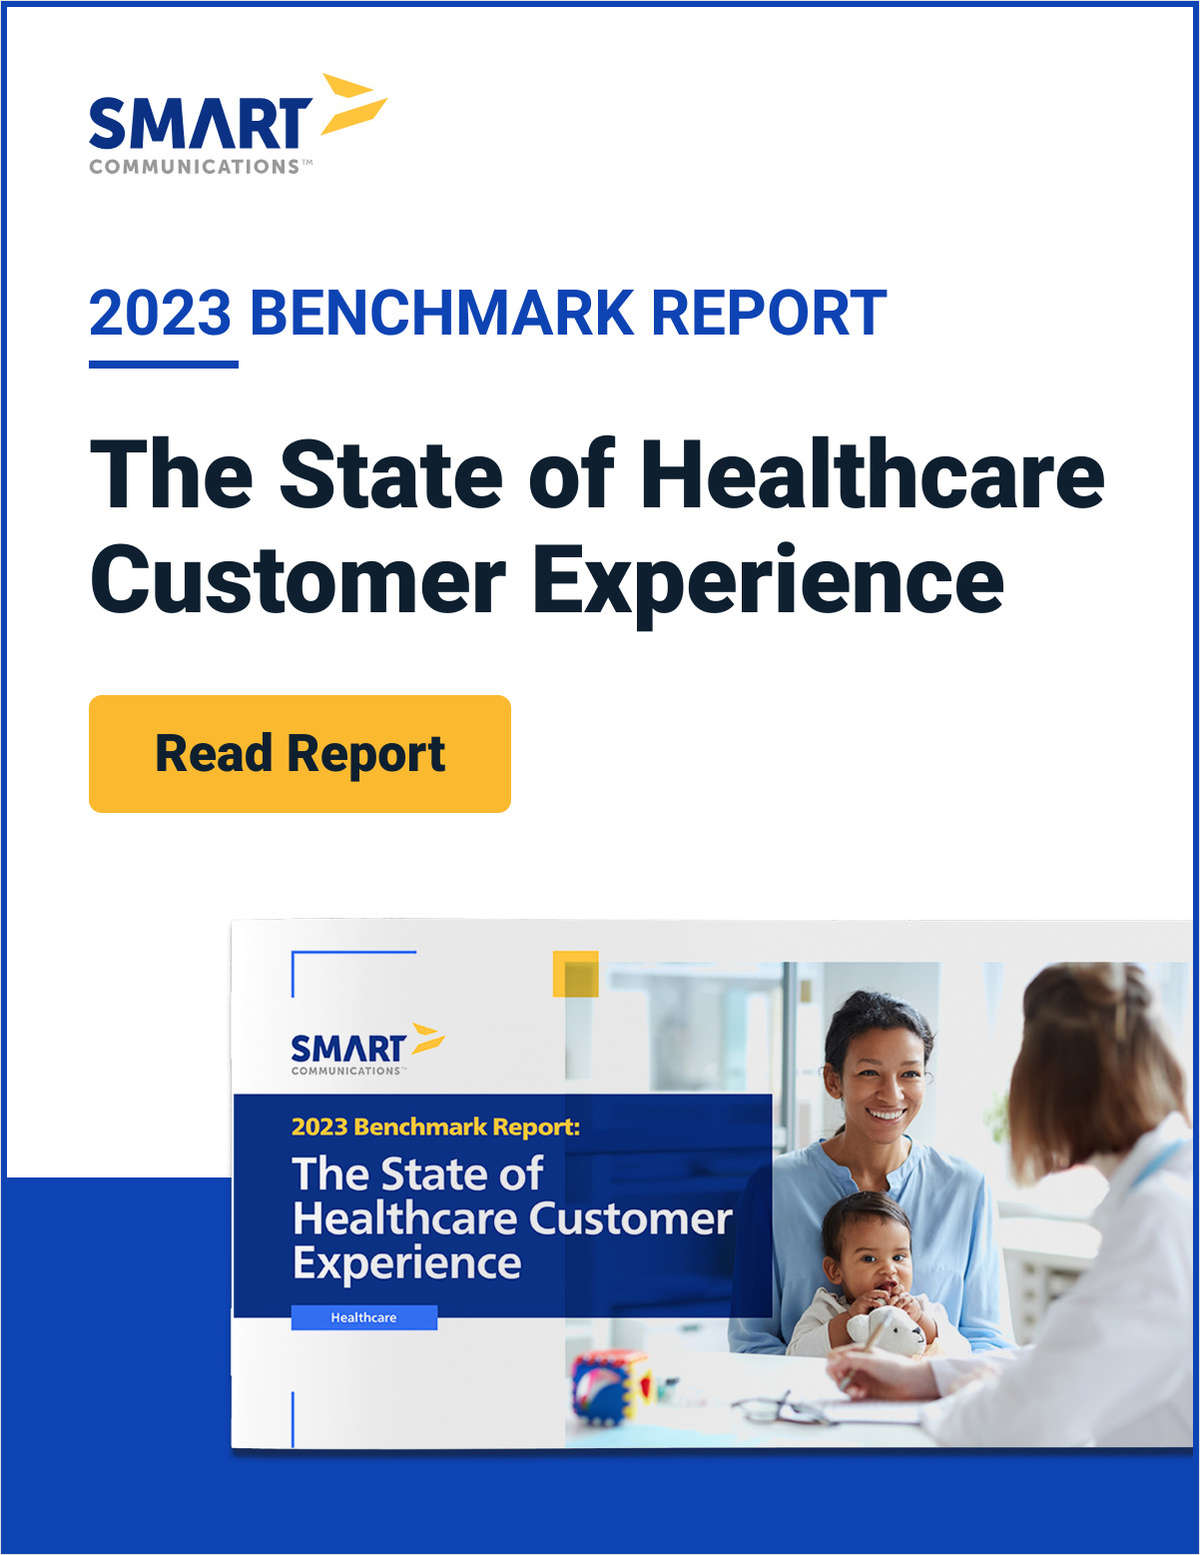 2023 Benchmark Report: The State of Healthcare Customer Experience